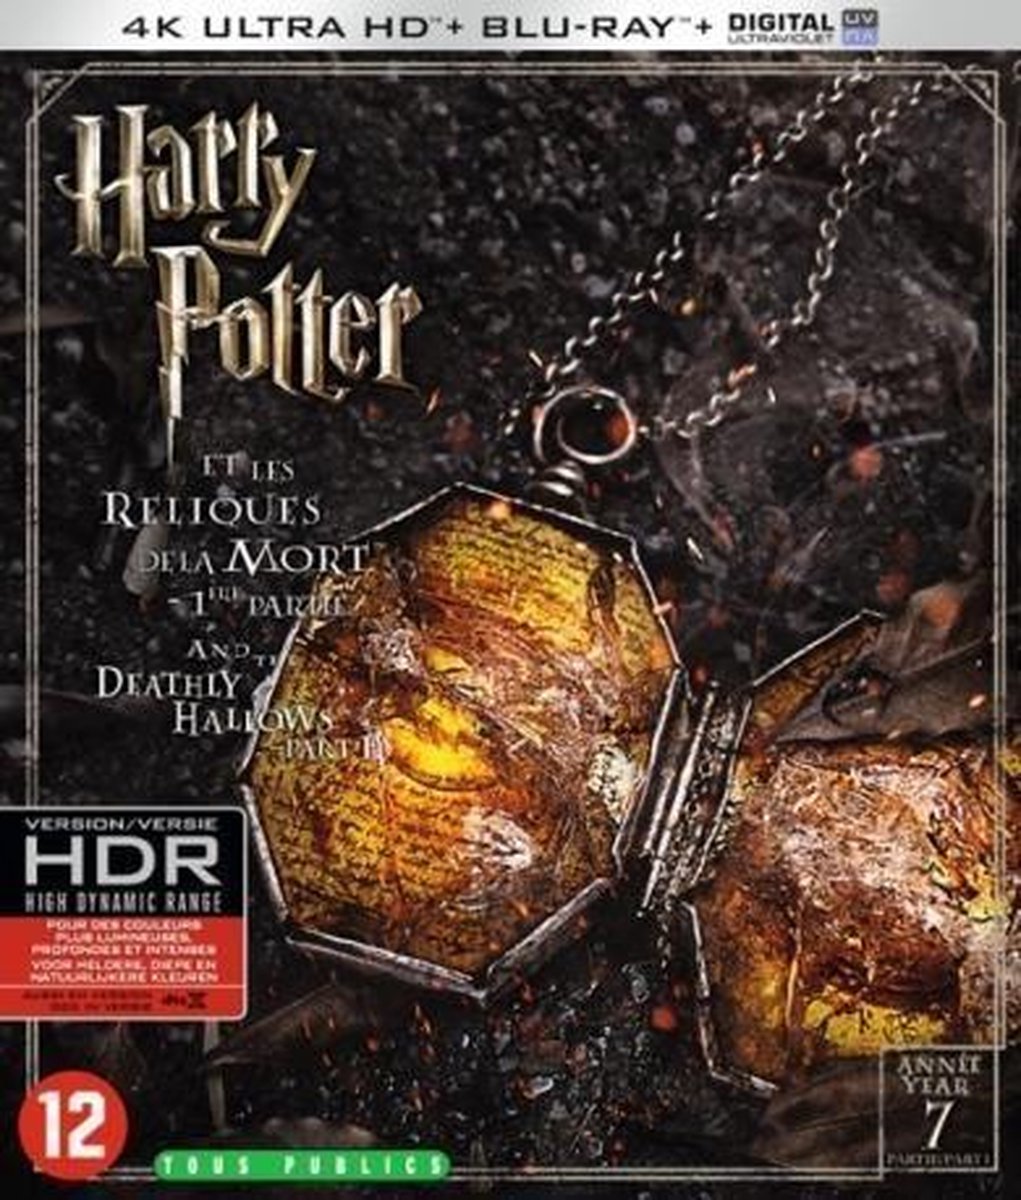 Harry Potter Year 7 - The Deathly Hallows Part 1 (4K Ultra HD Blu-ray)-